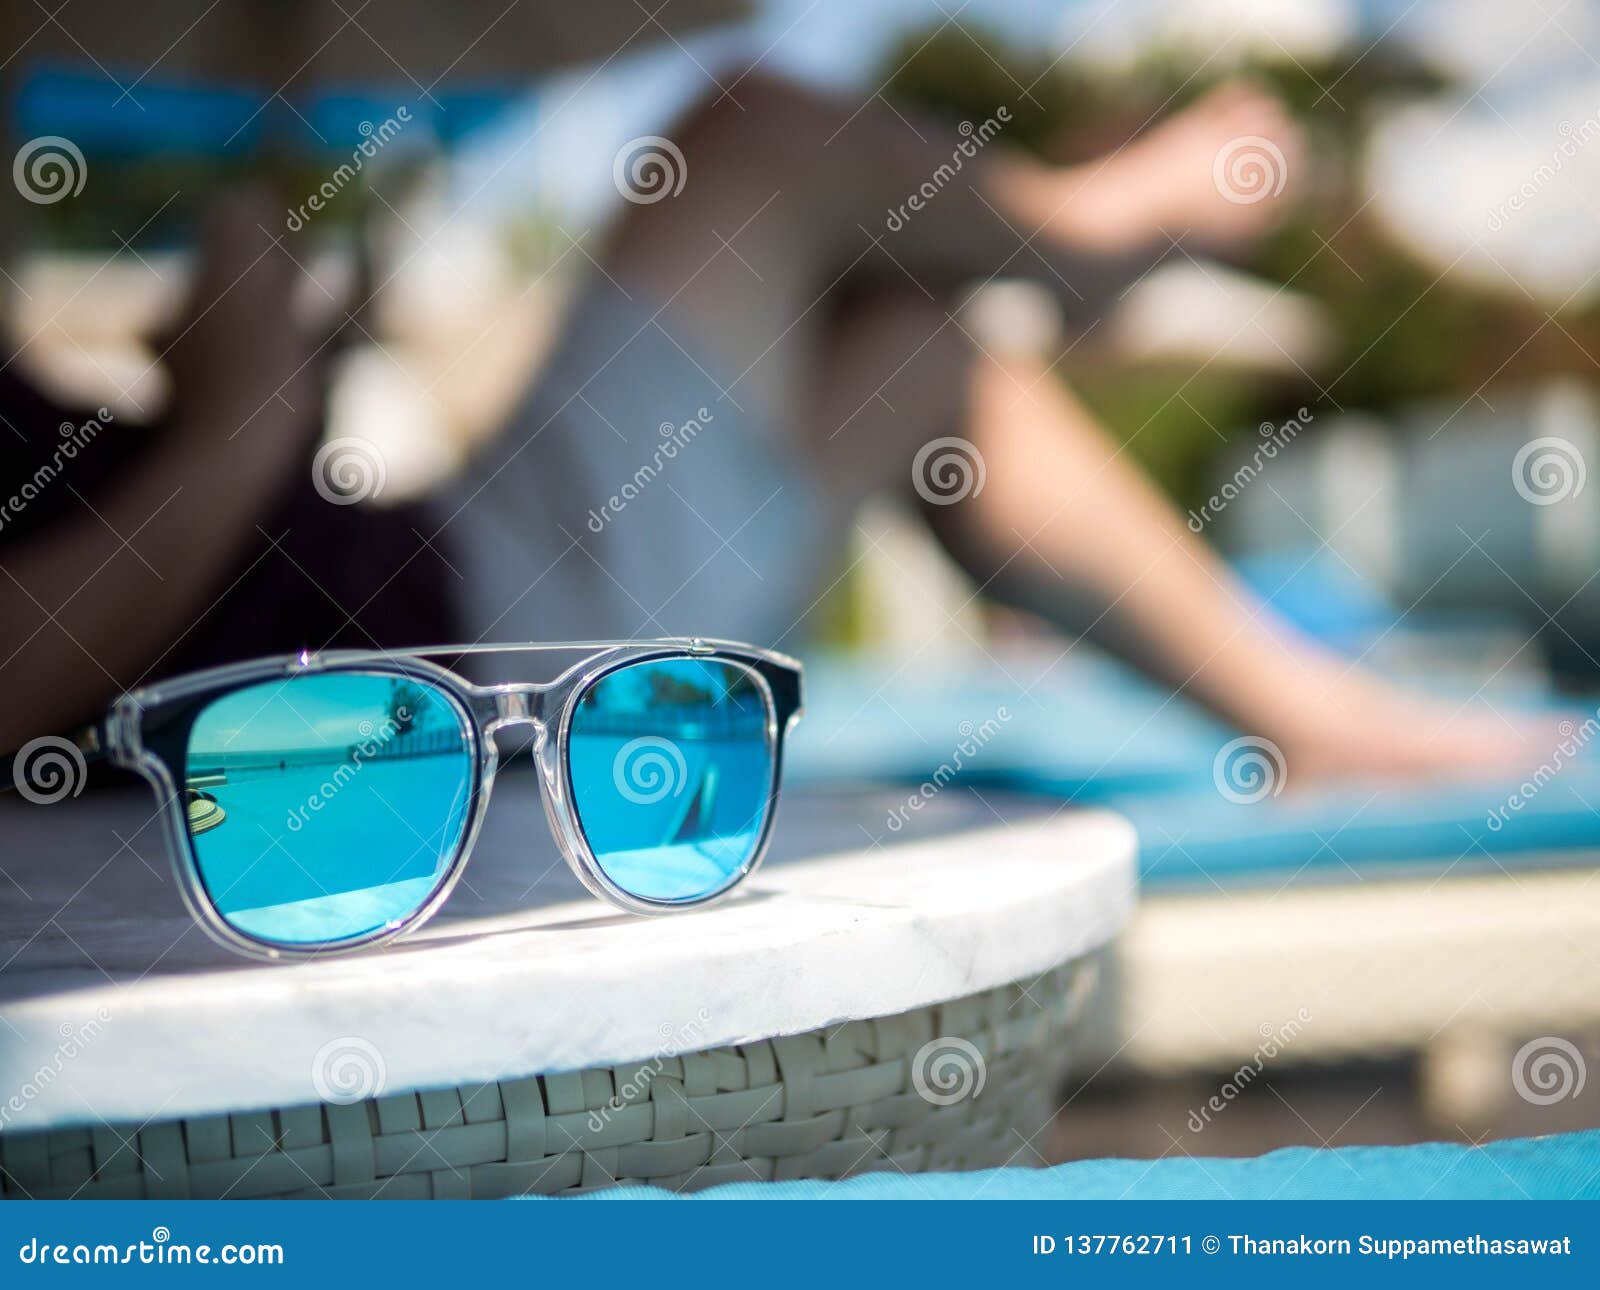 Sunglasses, Men`s Legs Resting in a Swimming Pool Background. Summer  Holiday Traveling Concept Design Banner with Copyspace Stock Image - Image  of feelings, light: 137762711